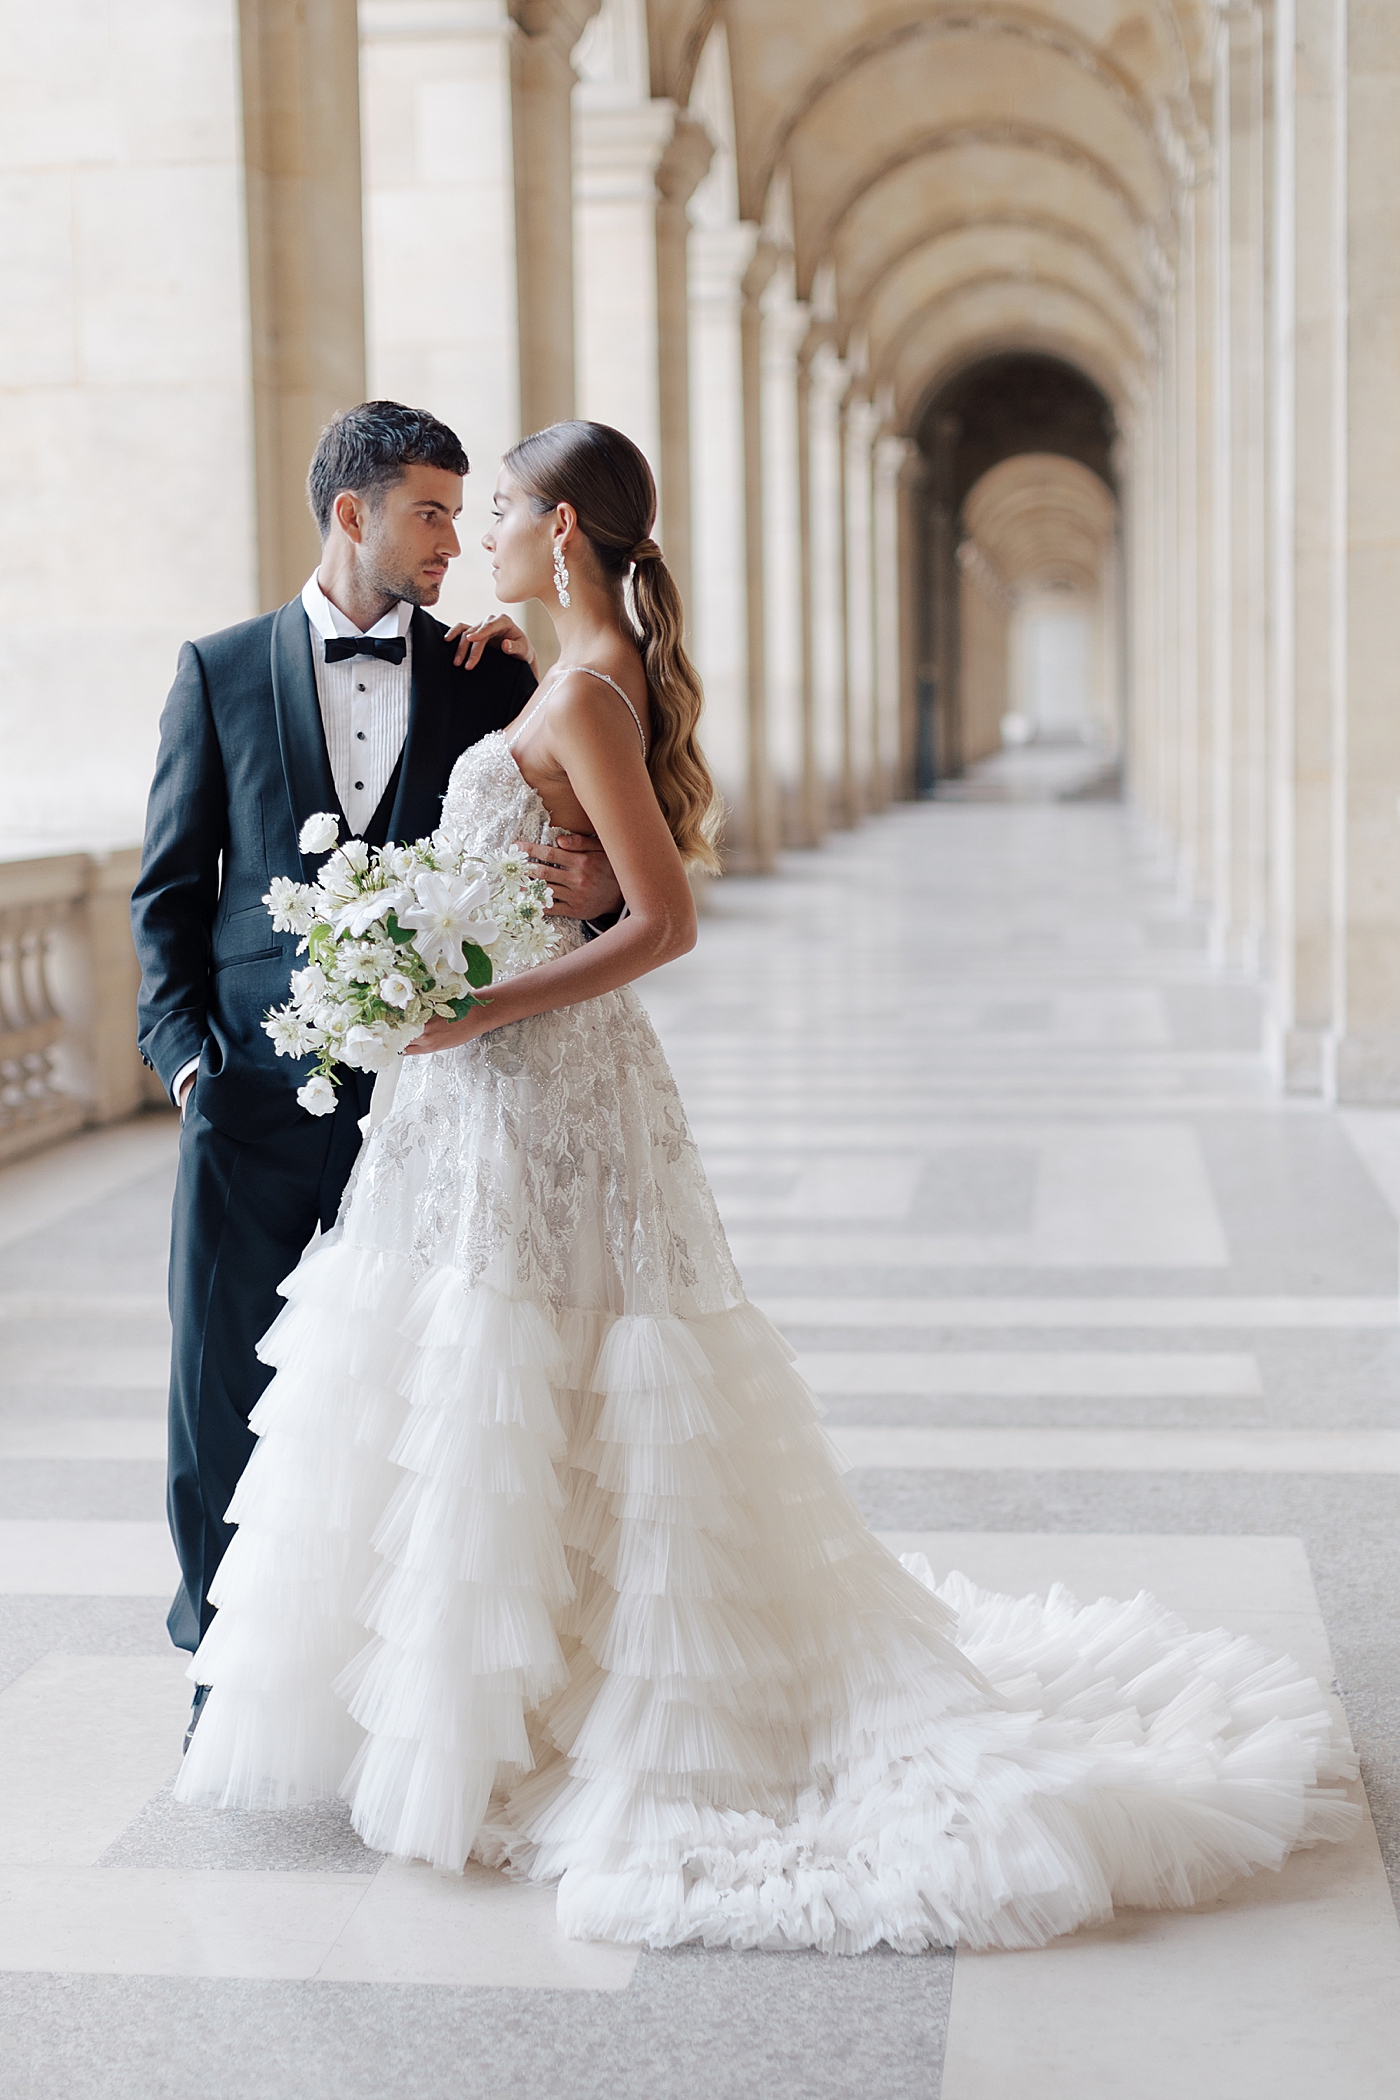 Bride and groom looking at each other while standing in the outside hallway of the Louvre with a bouquet | Image by Hope Helmuth Photography